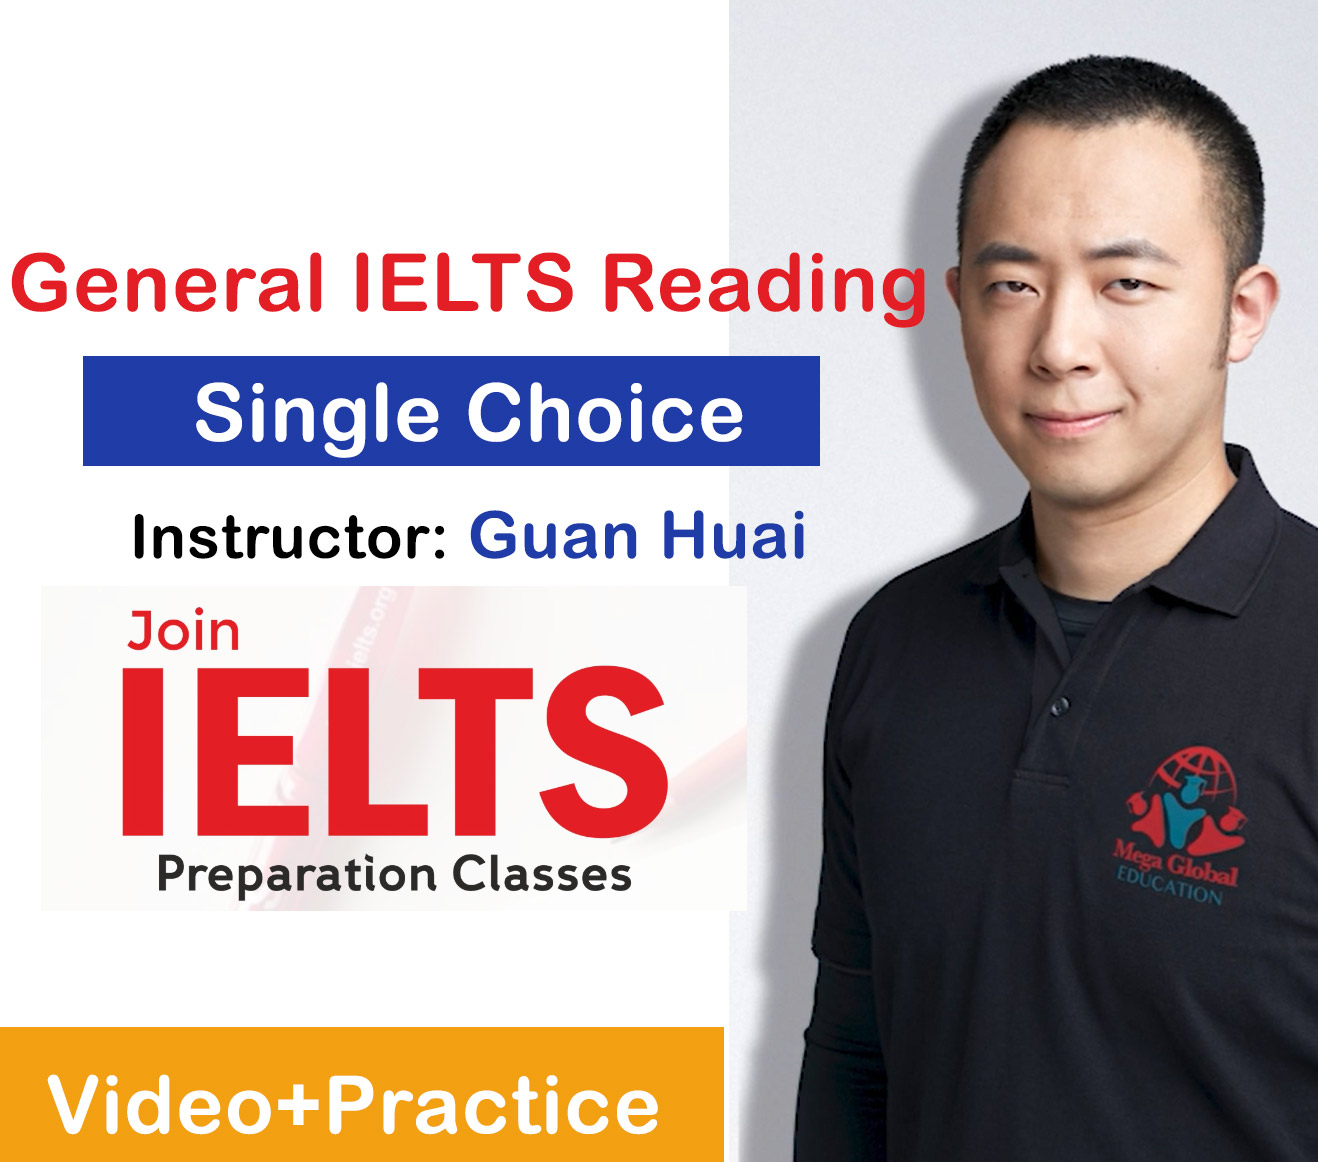 General IELTS Reading Single Choice Lesson and Practice 1